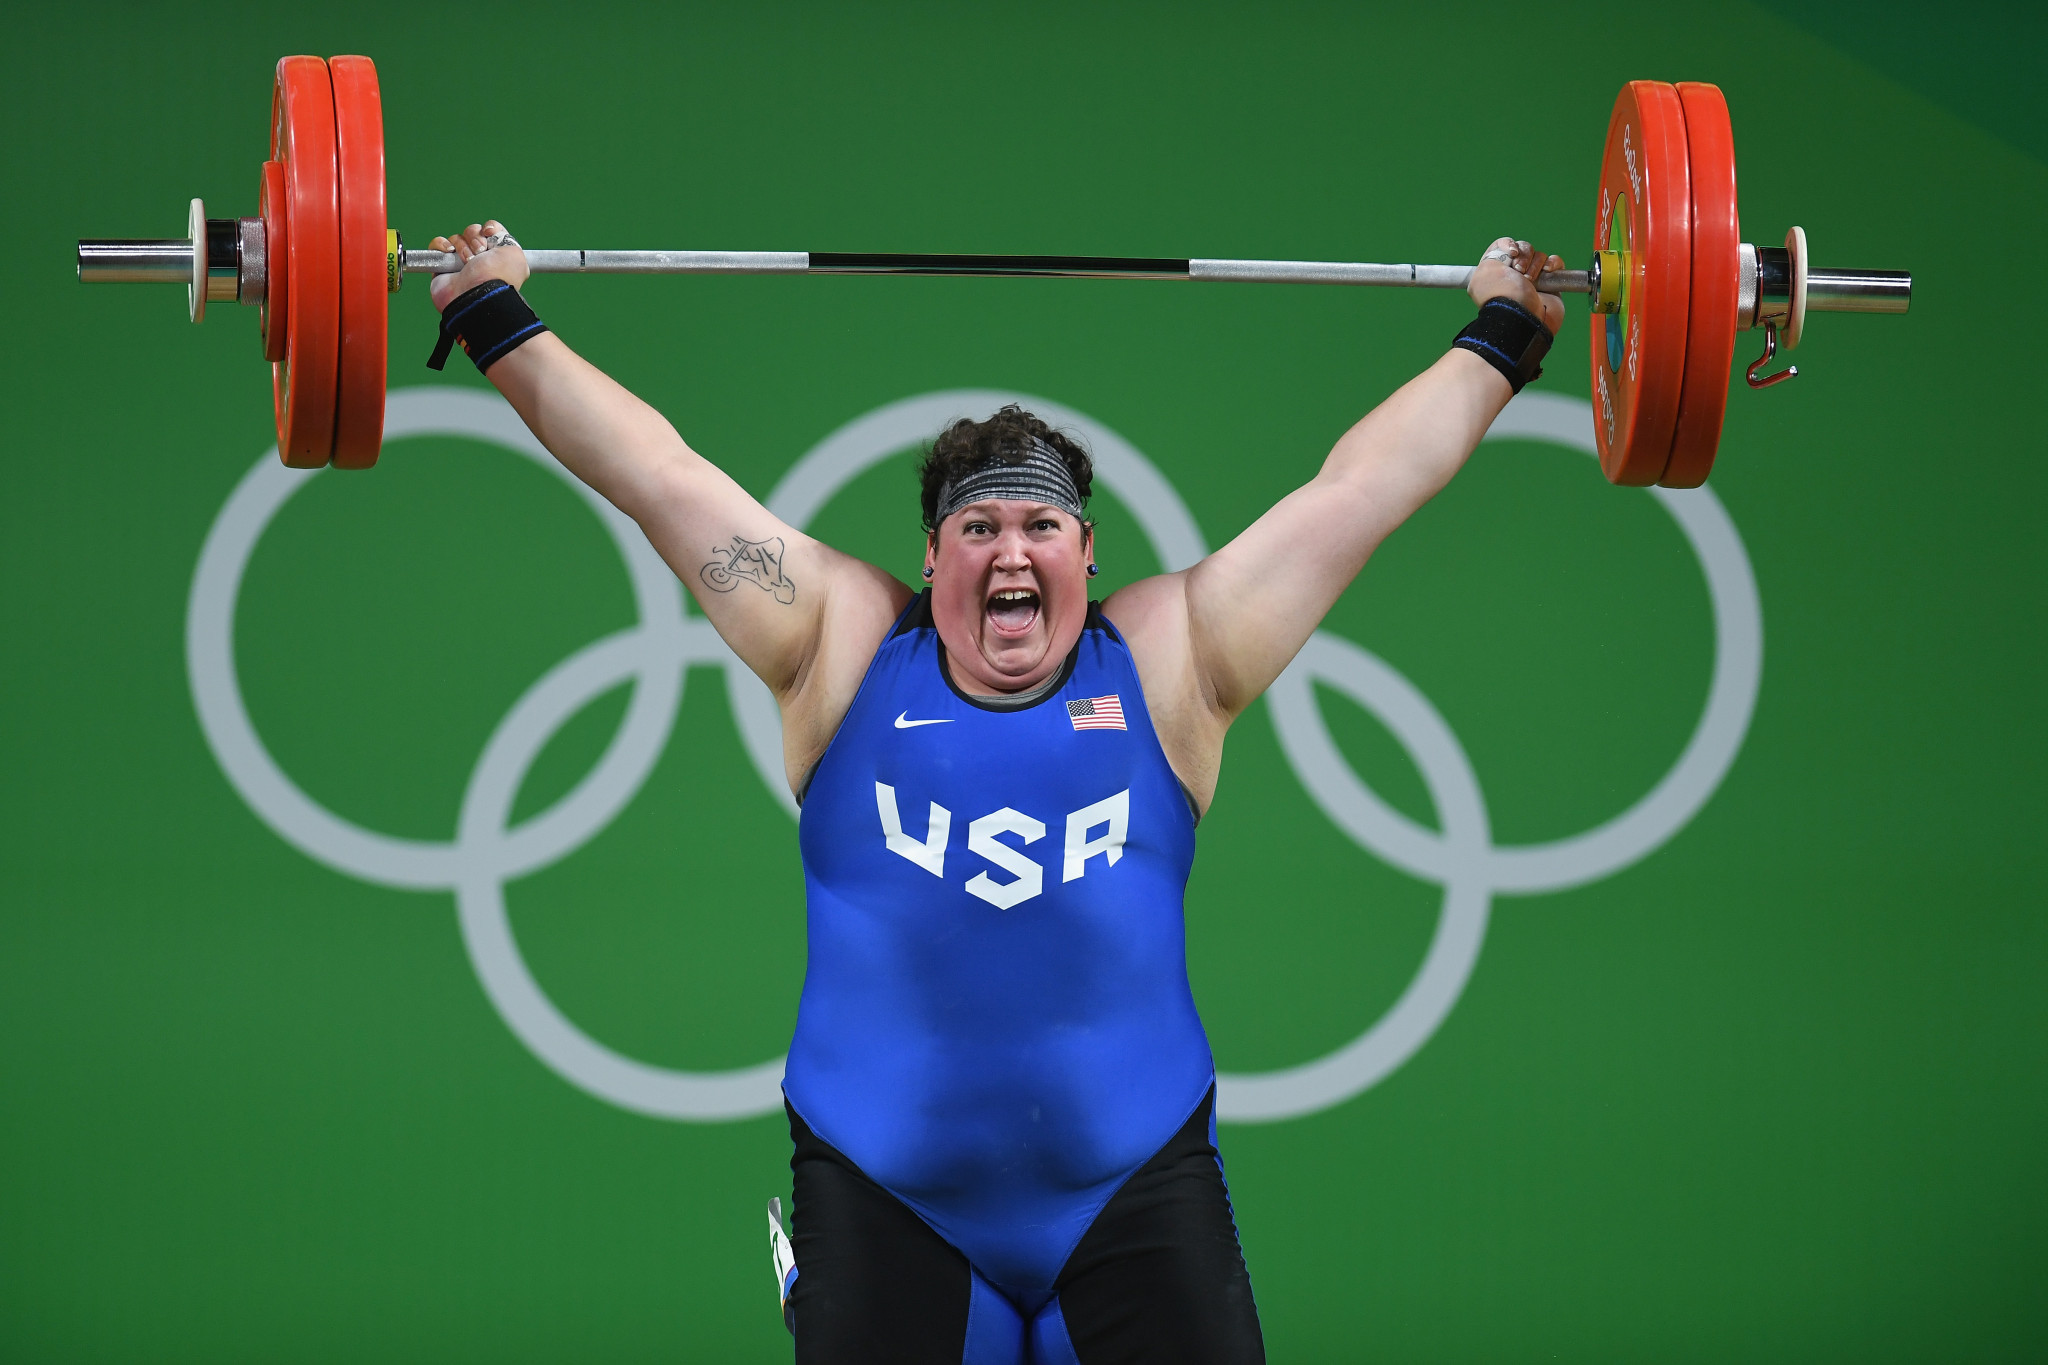 Sarah Robles won gold in each category of the 2017 IWF World Championships ©Getty Images